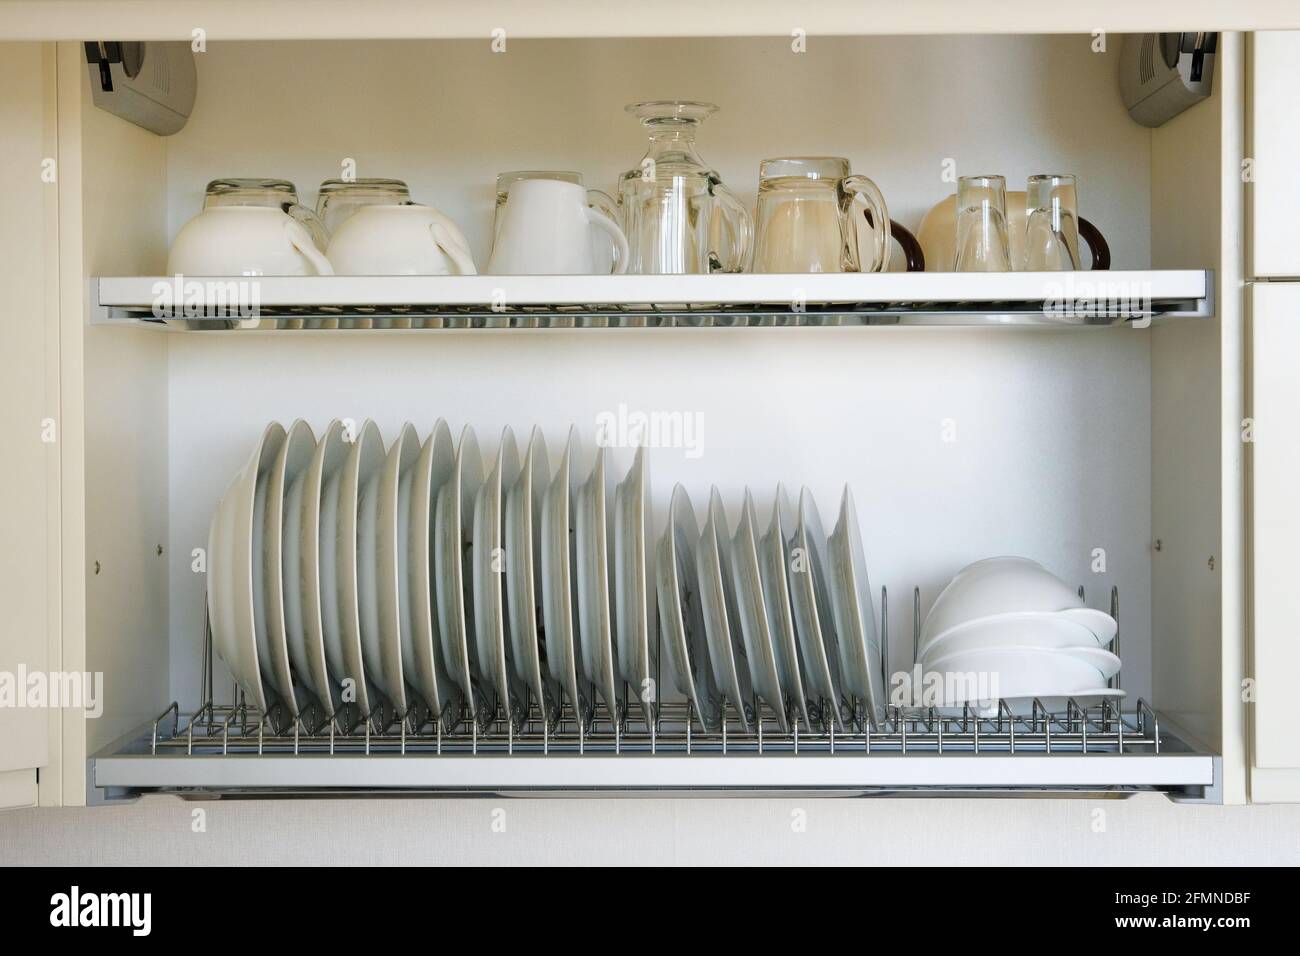 https://c8.alamy.com/comp/2FMNDBF/shelf-for-tableware-drying-in-modern-kitchen-white-glass-and-ceramic-plates-and-cups-on-metal-rack-inside-kitchen-cupboard-2FMNDBF.jpg